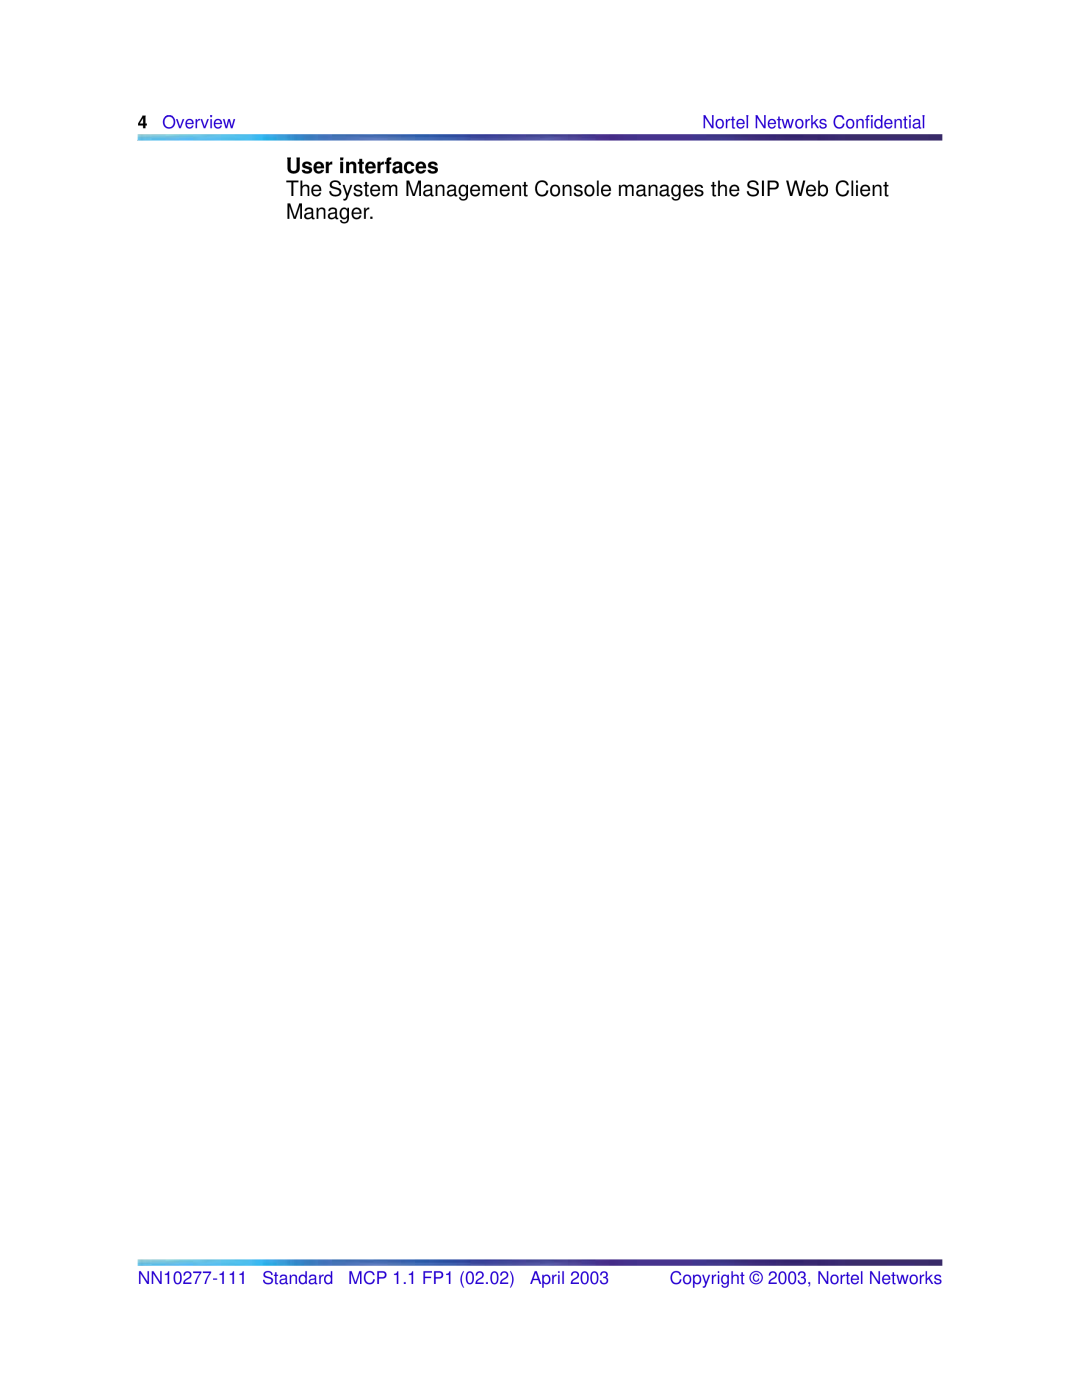 Nortel Networks NN10277-111 manual User interfaces, Overview, Nortel Networks Confidential, Copyright 2003, Nortel Networks 